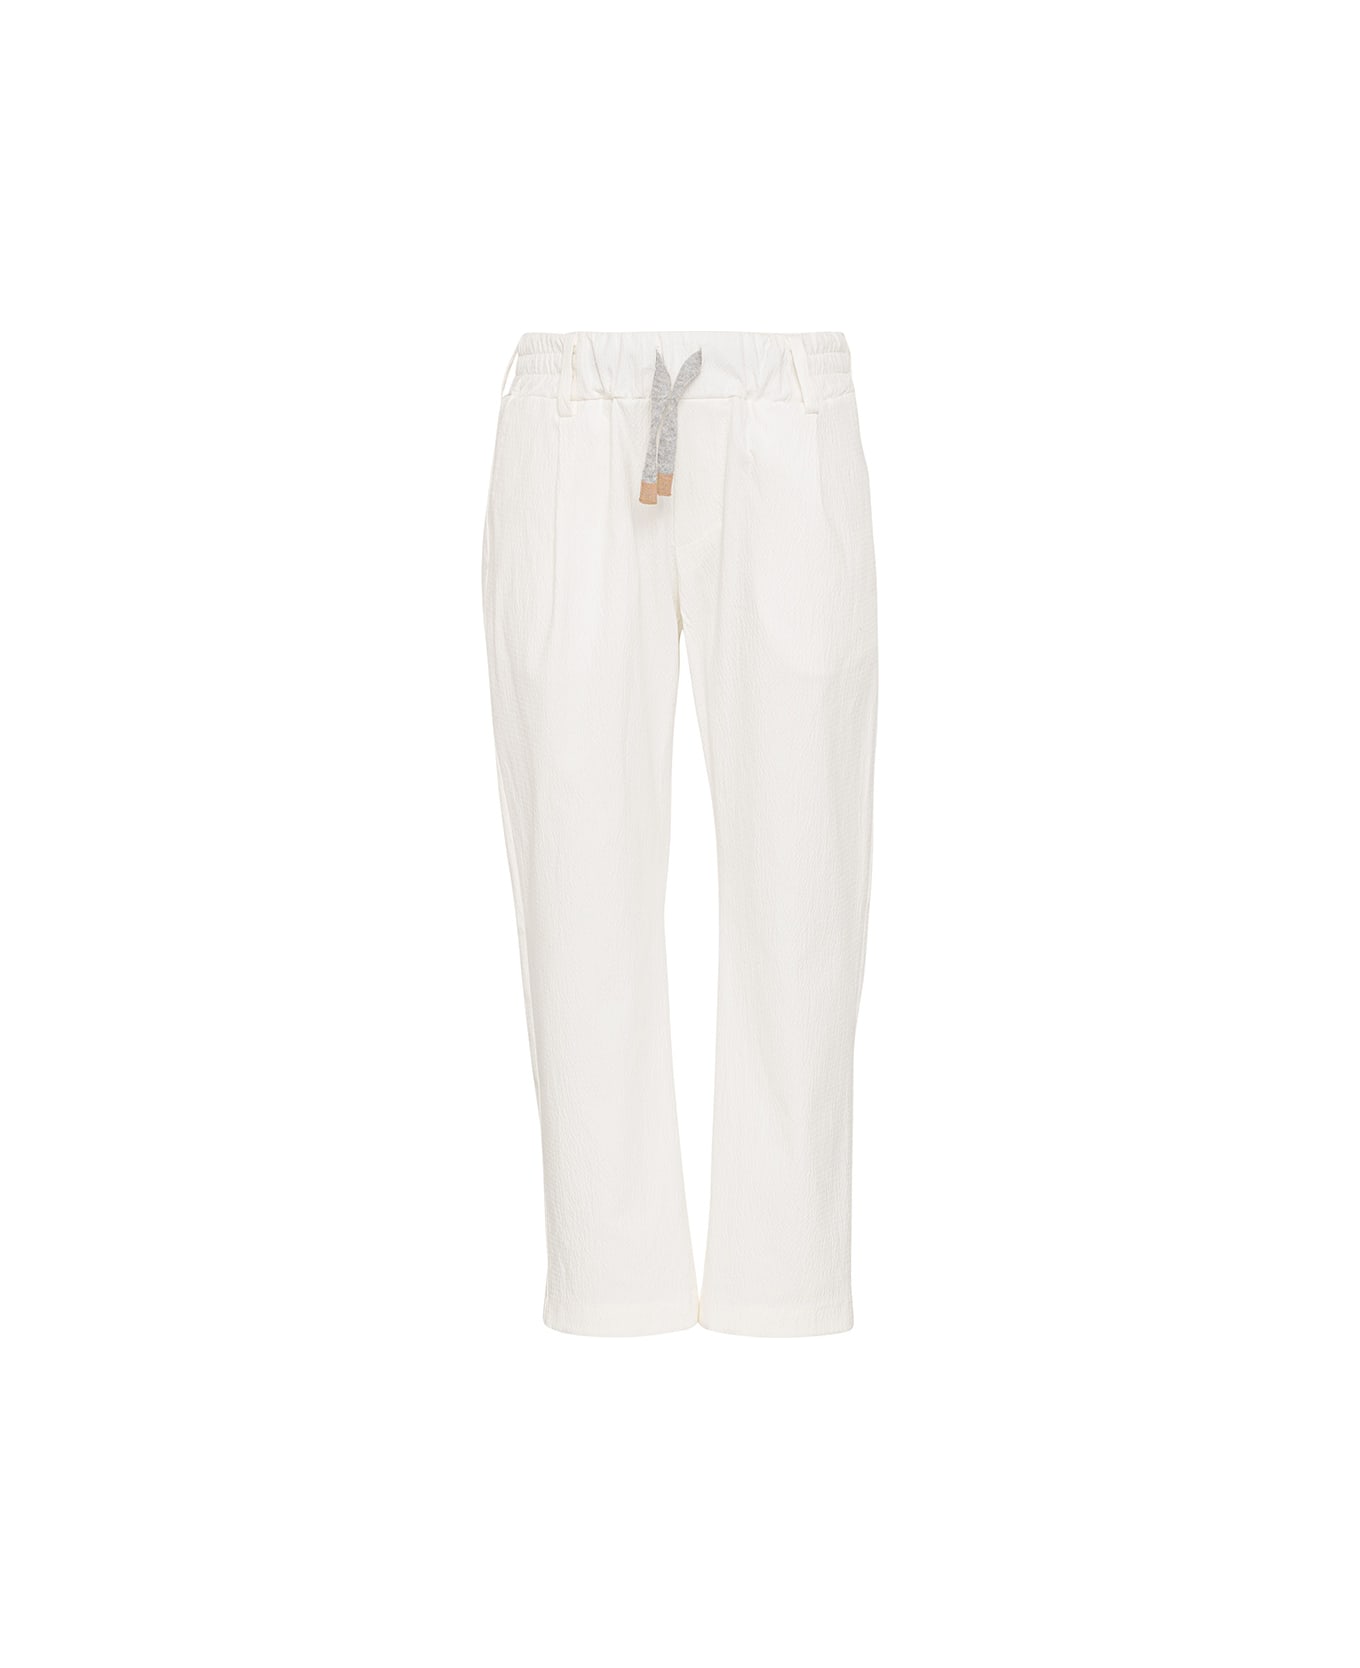 Eleventy White Joggers Pants With Contrasting Drawstring - White ボトムス